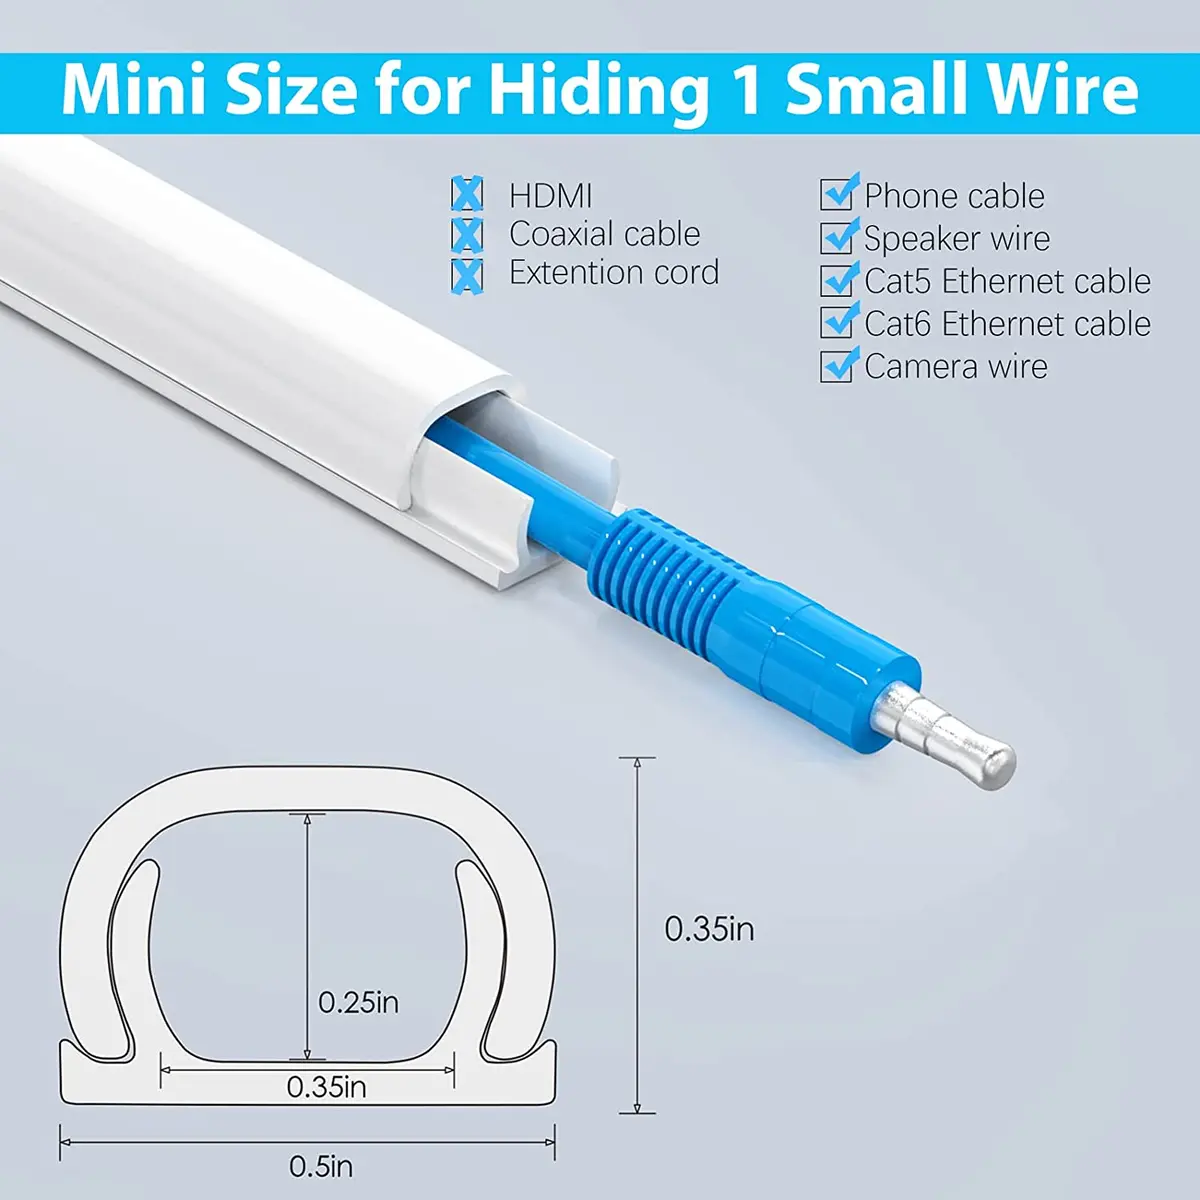 Single Cord Cover, YECAYE 125 Wire Concealer Hide Cable on Wall